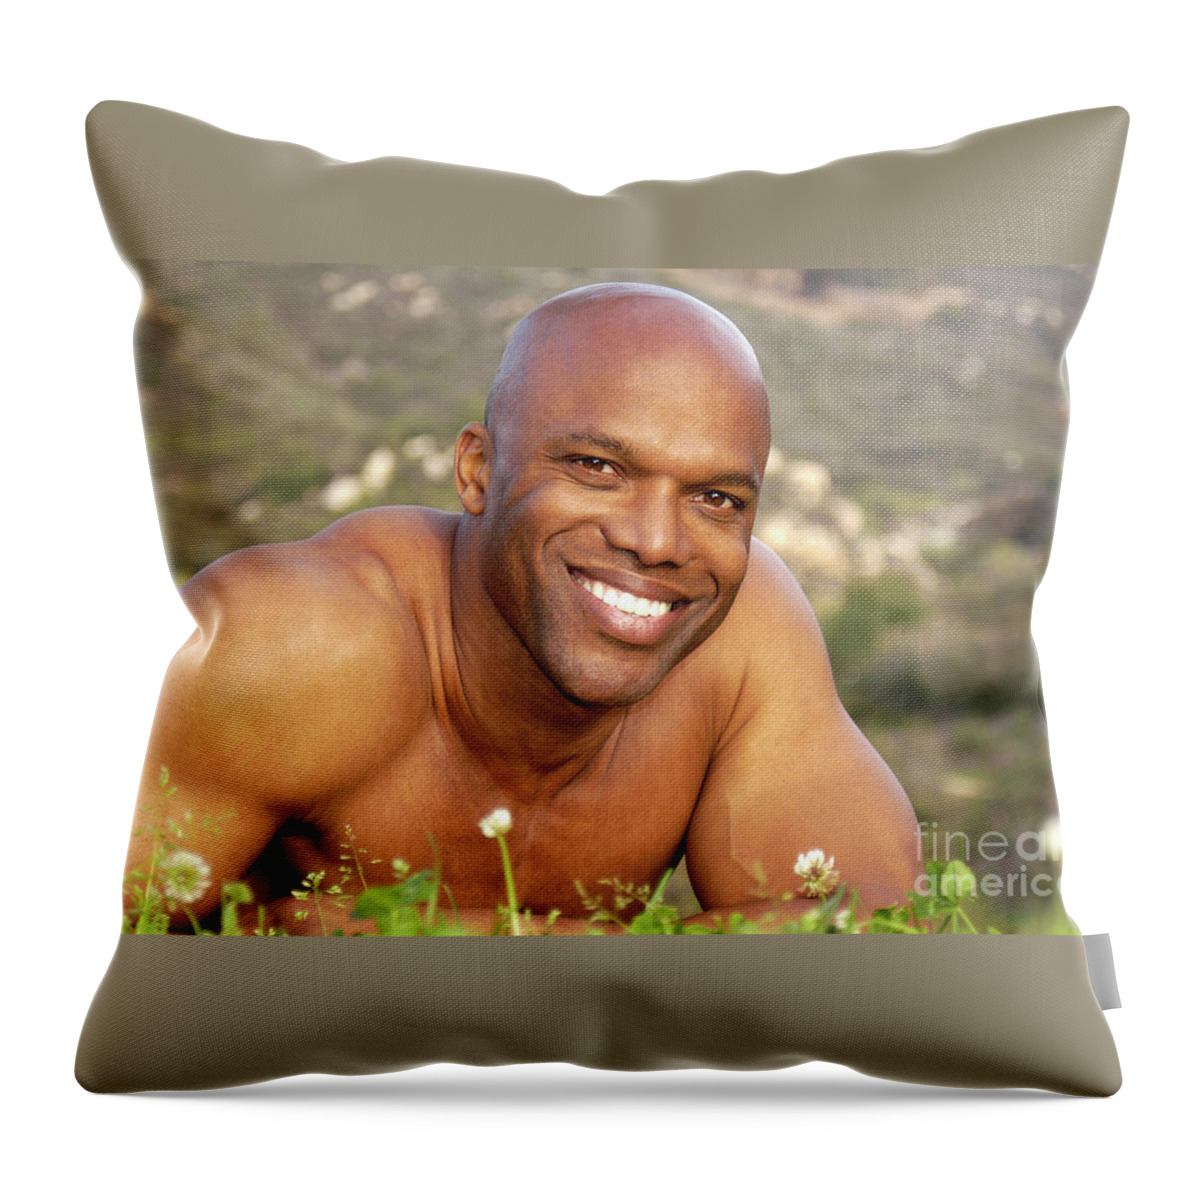 Male Throw Pillow featuring the photograph Hot looking bald black muscular man by Gunther Allen